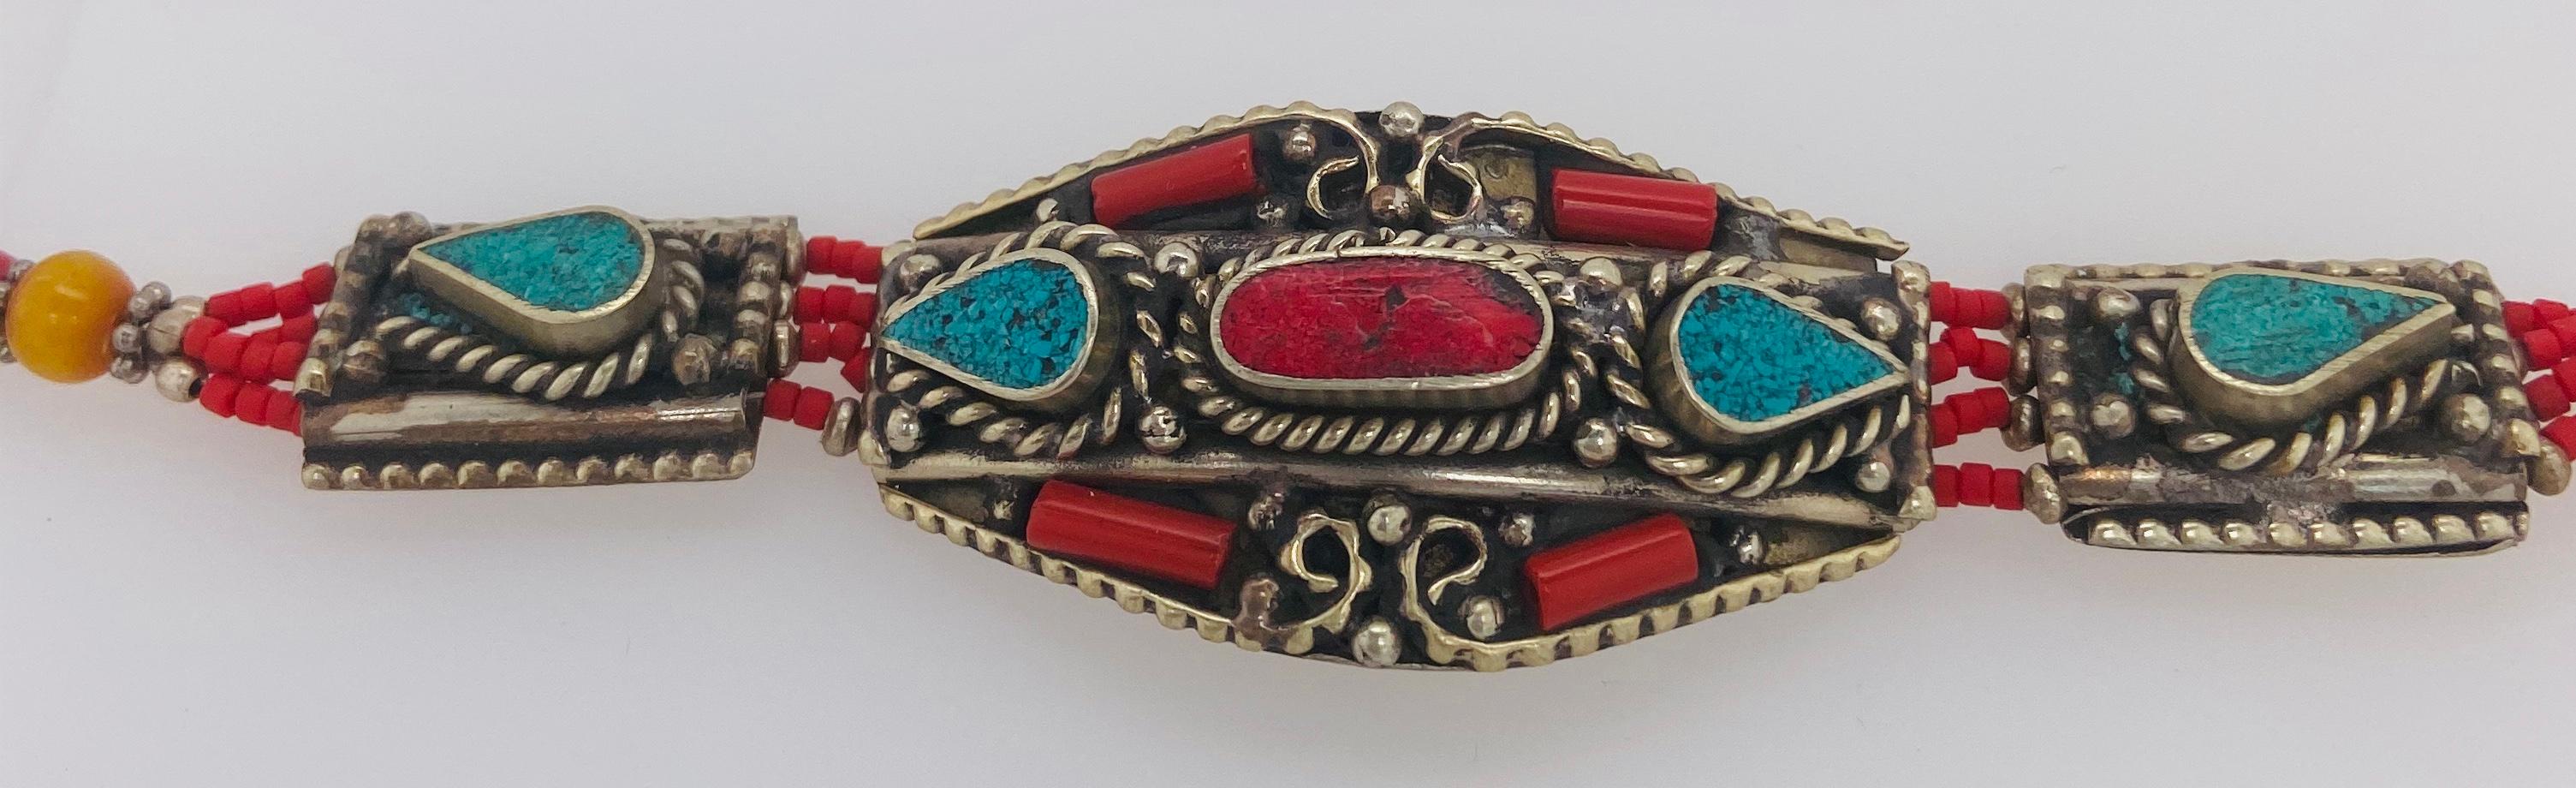 Midcentury Moroccan Tribal Silver Bracelet with Turquoise and Red Stones For Sale 6